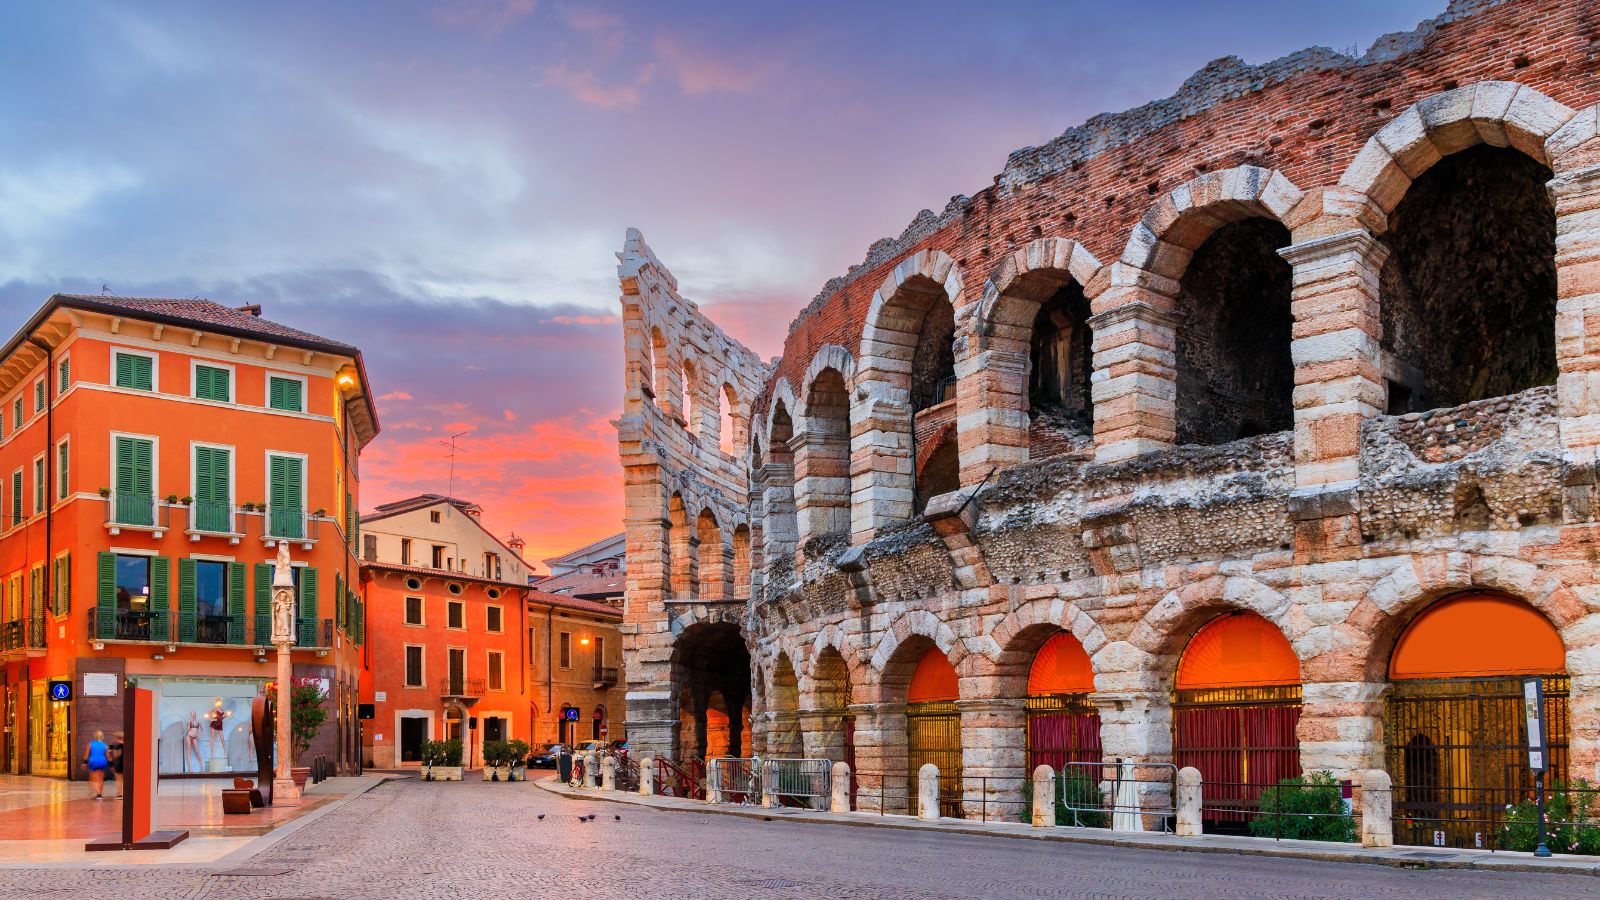 <p>If you’re a fan of Shakespeare, then you’ll want to visit Verona for Juliet’s house in Romeo and Juliet. There are also plenty of other things for you to do, such as heading to the Roman Arena or strolling through the historic city center. There are also many delicious wines to try, such as the local Valpolicella.</p>